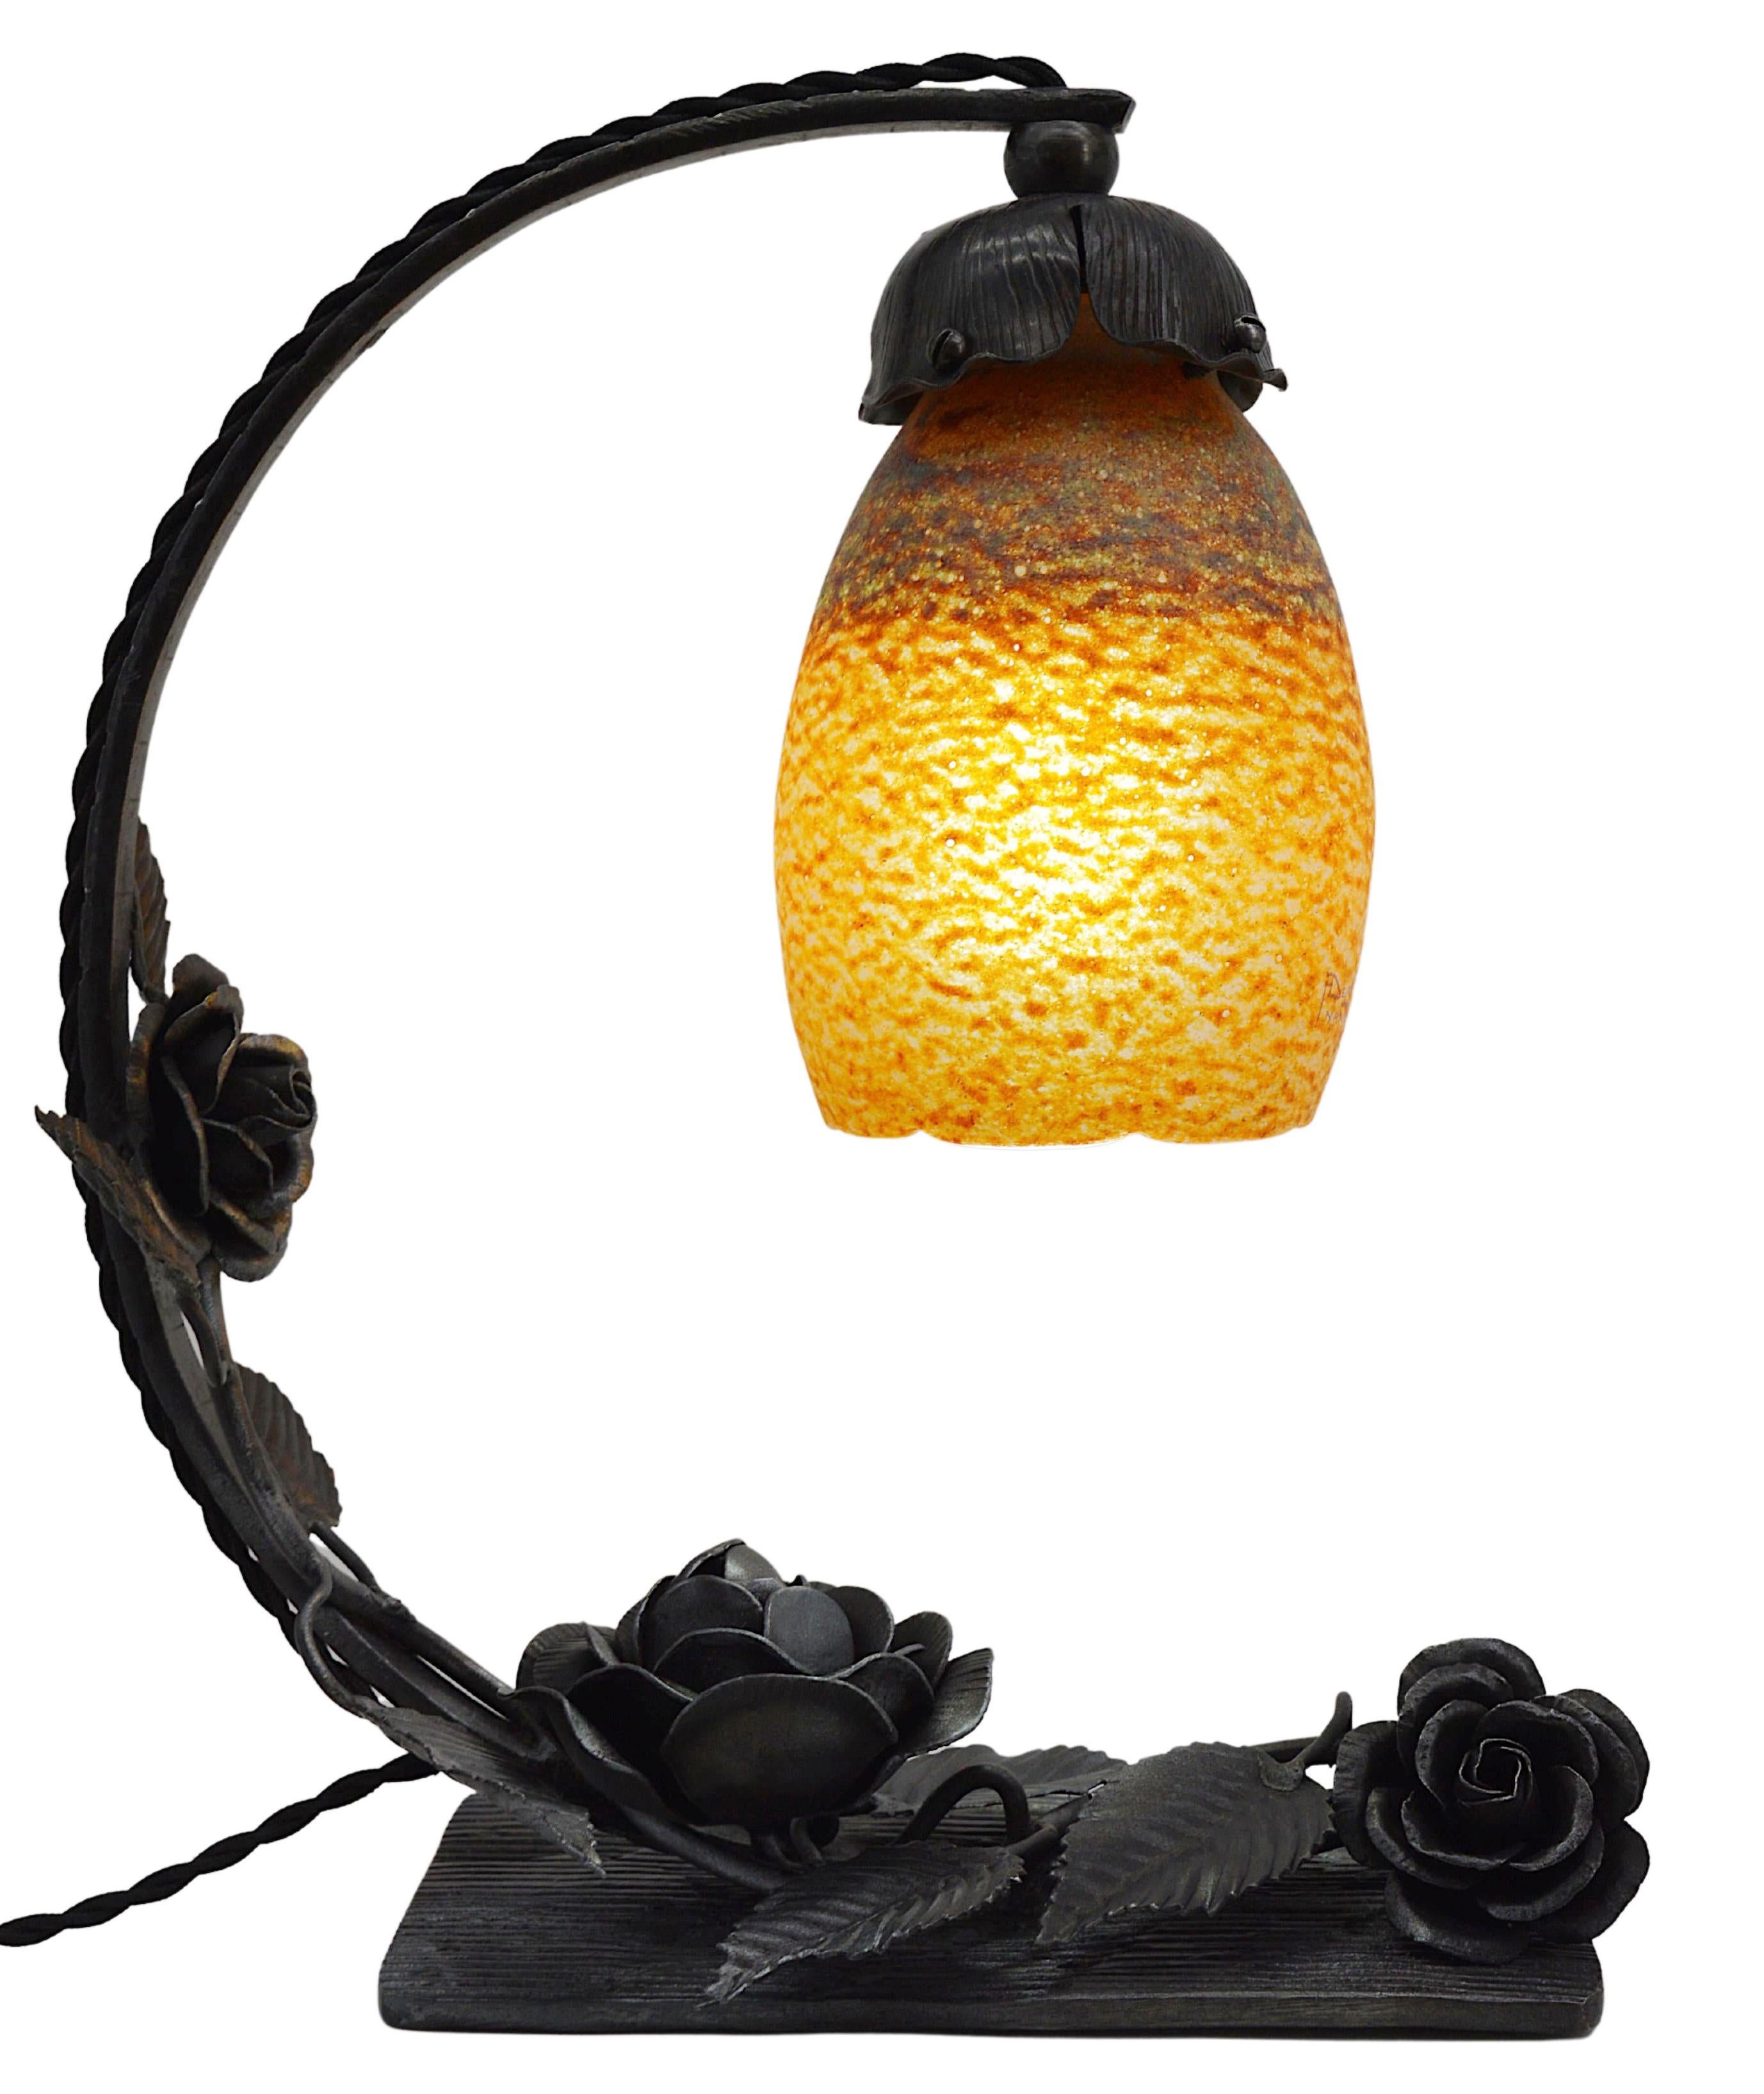 French Art Deco table lamp by Andre Delatte (Jarville, Nancy), France, Late 1920s. Blown double glass shade by Delatte hung at its wrought-iron base decorated with a rosebush. Height : 12.6